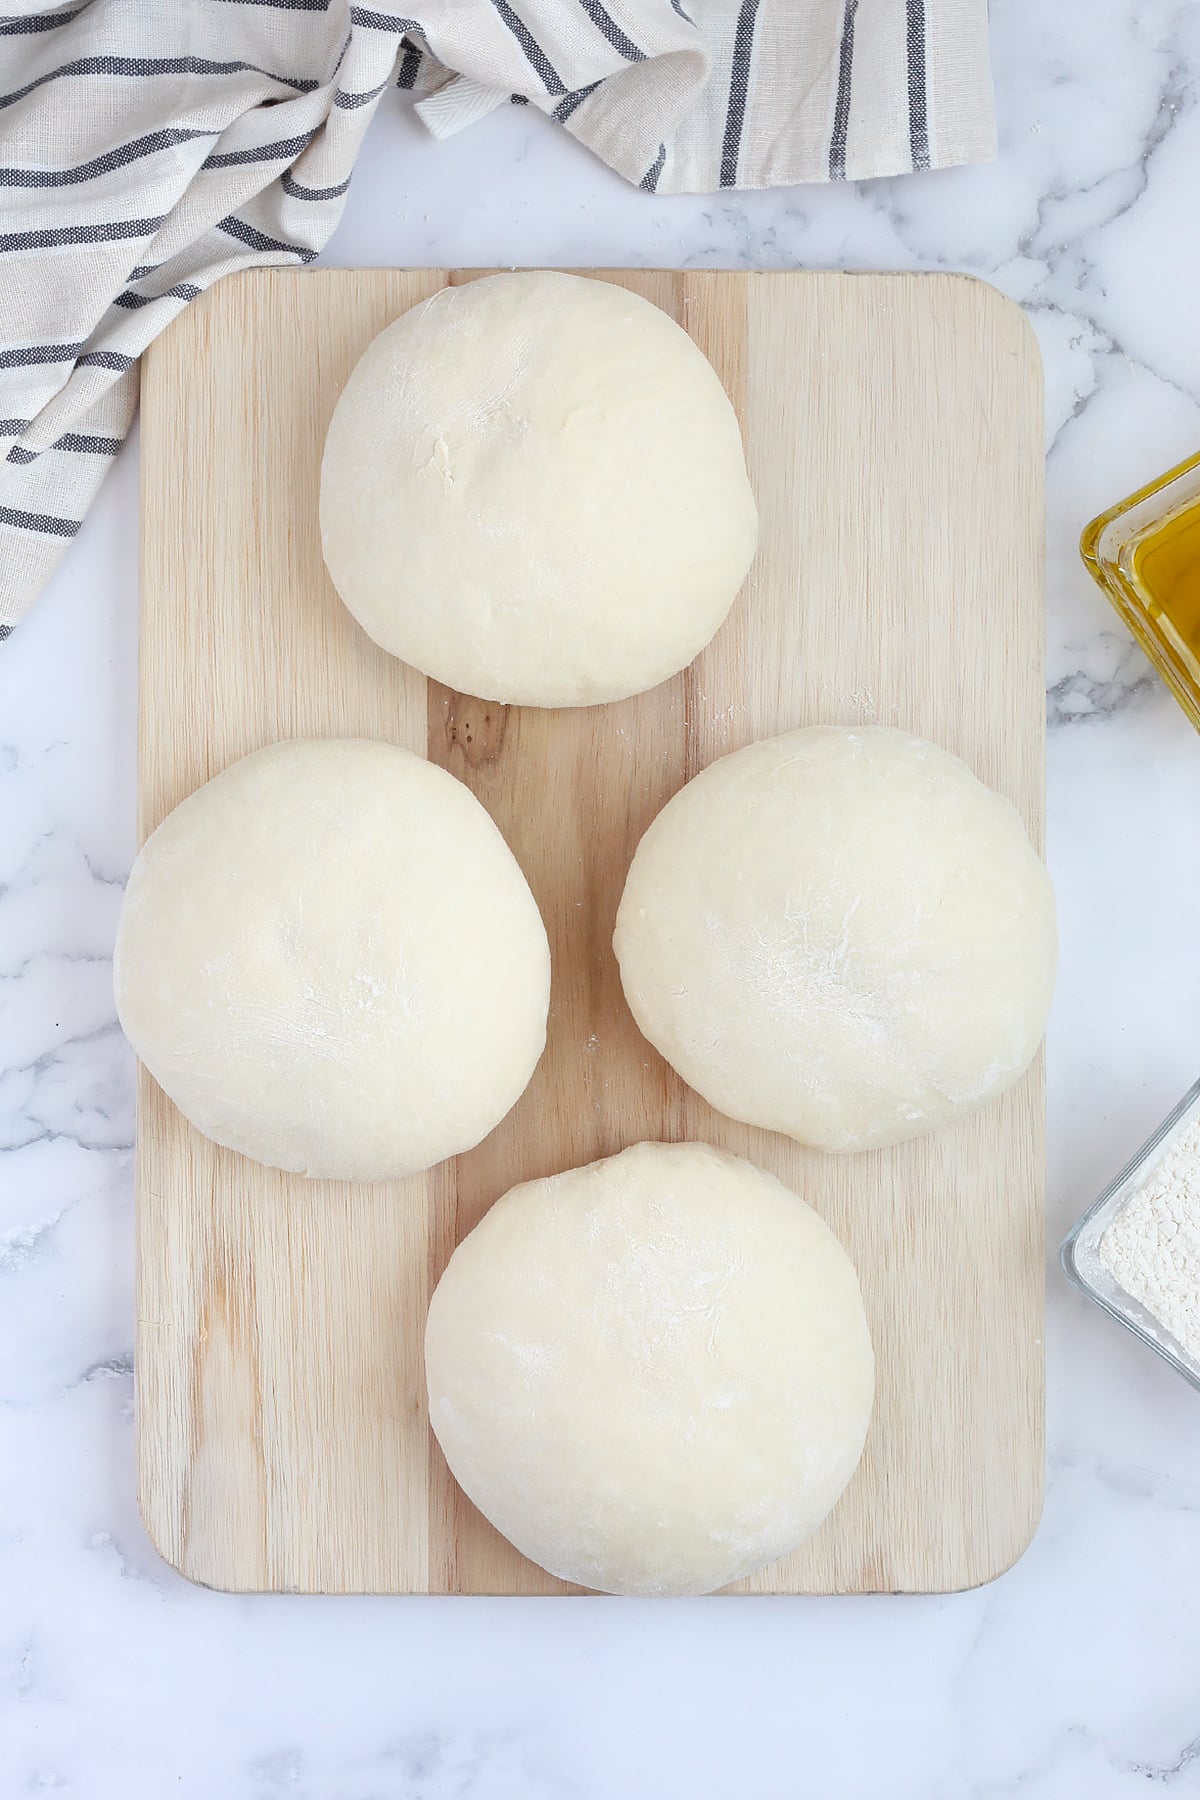 Four balls of pizza dough on a wooden cutting board with a striped linen in the background.